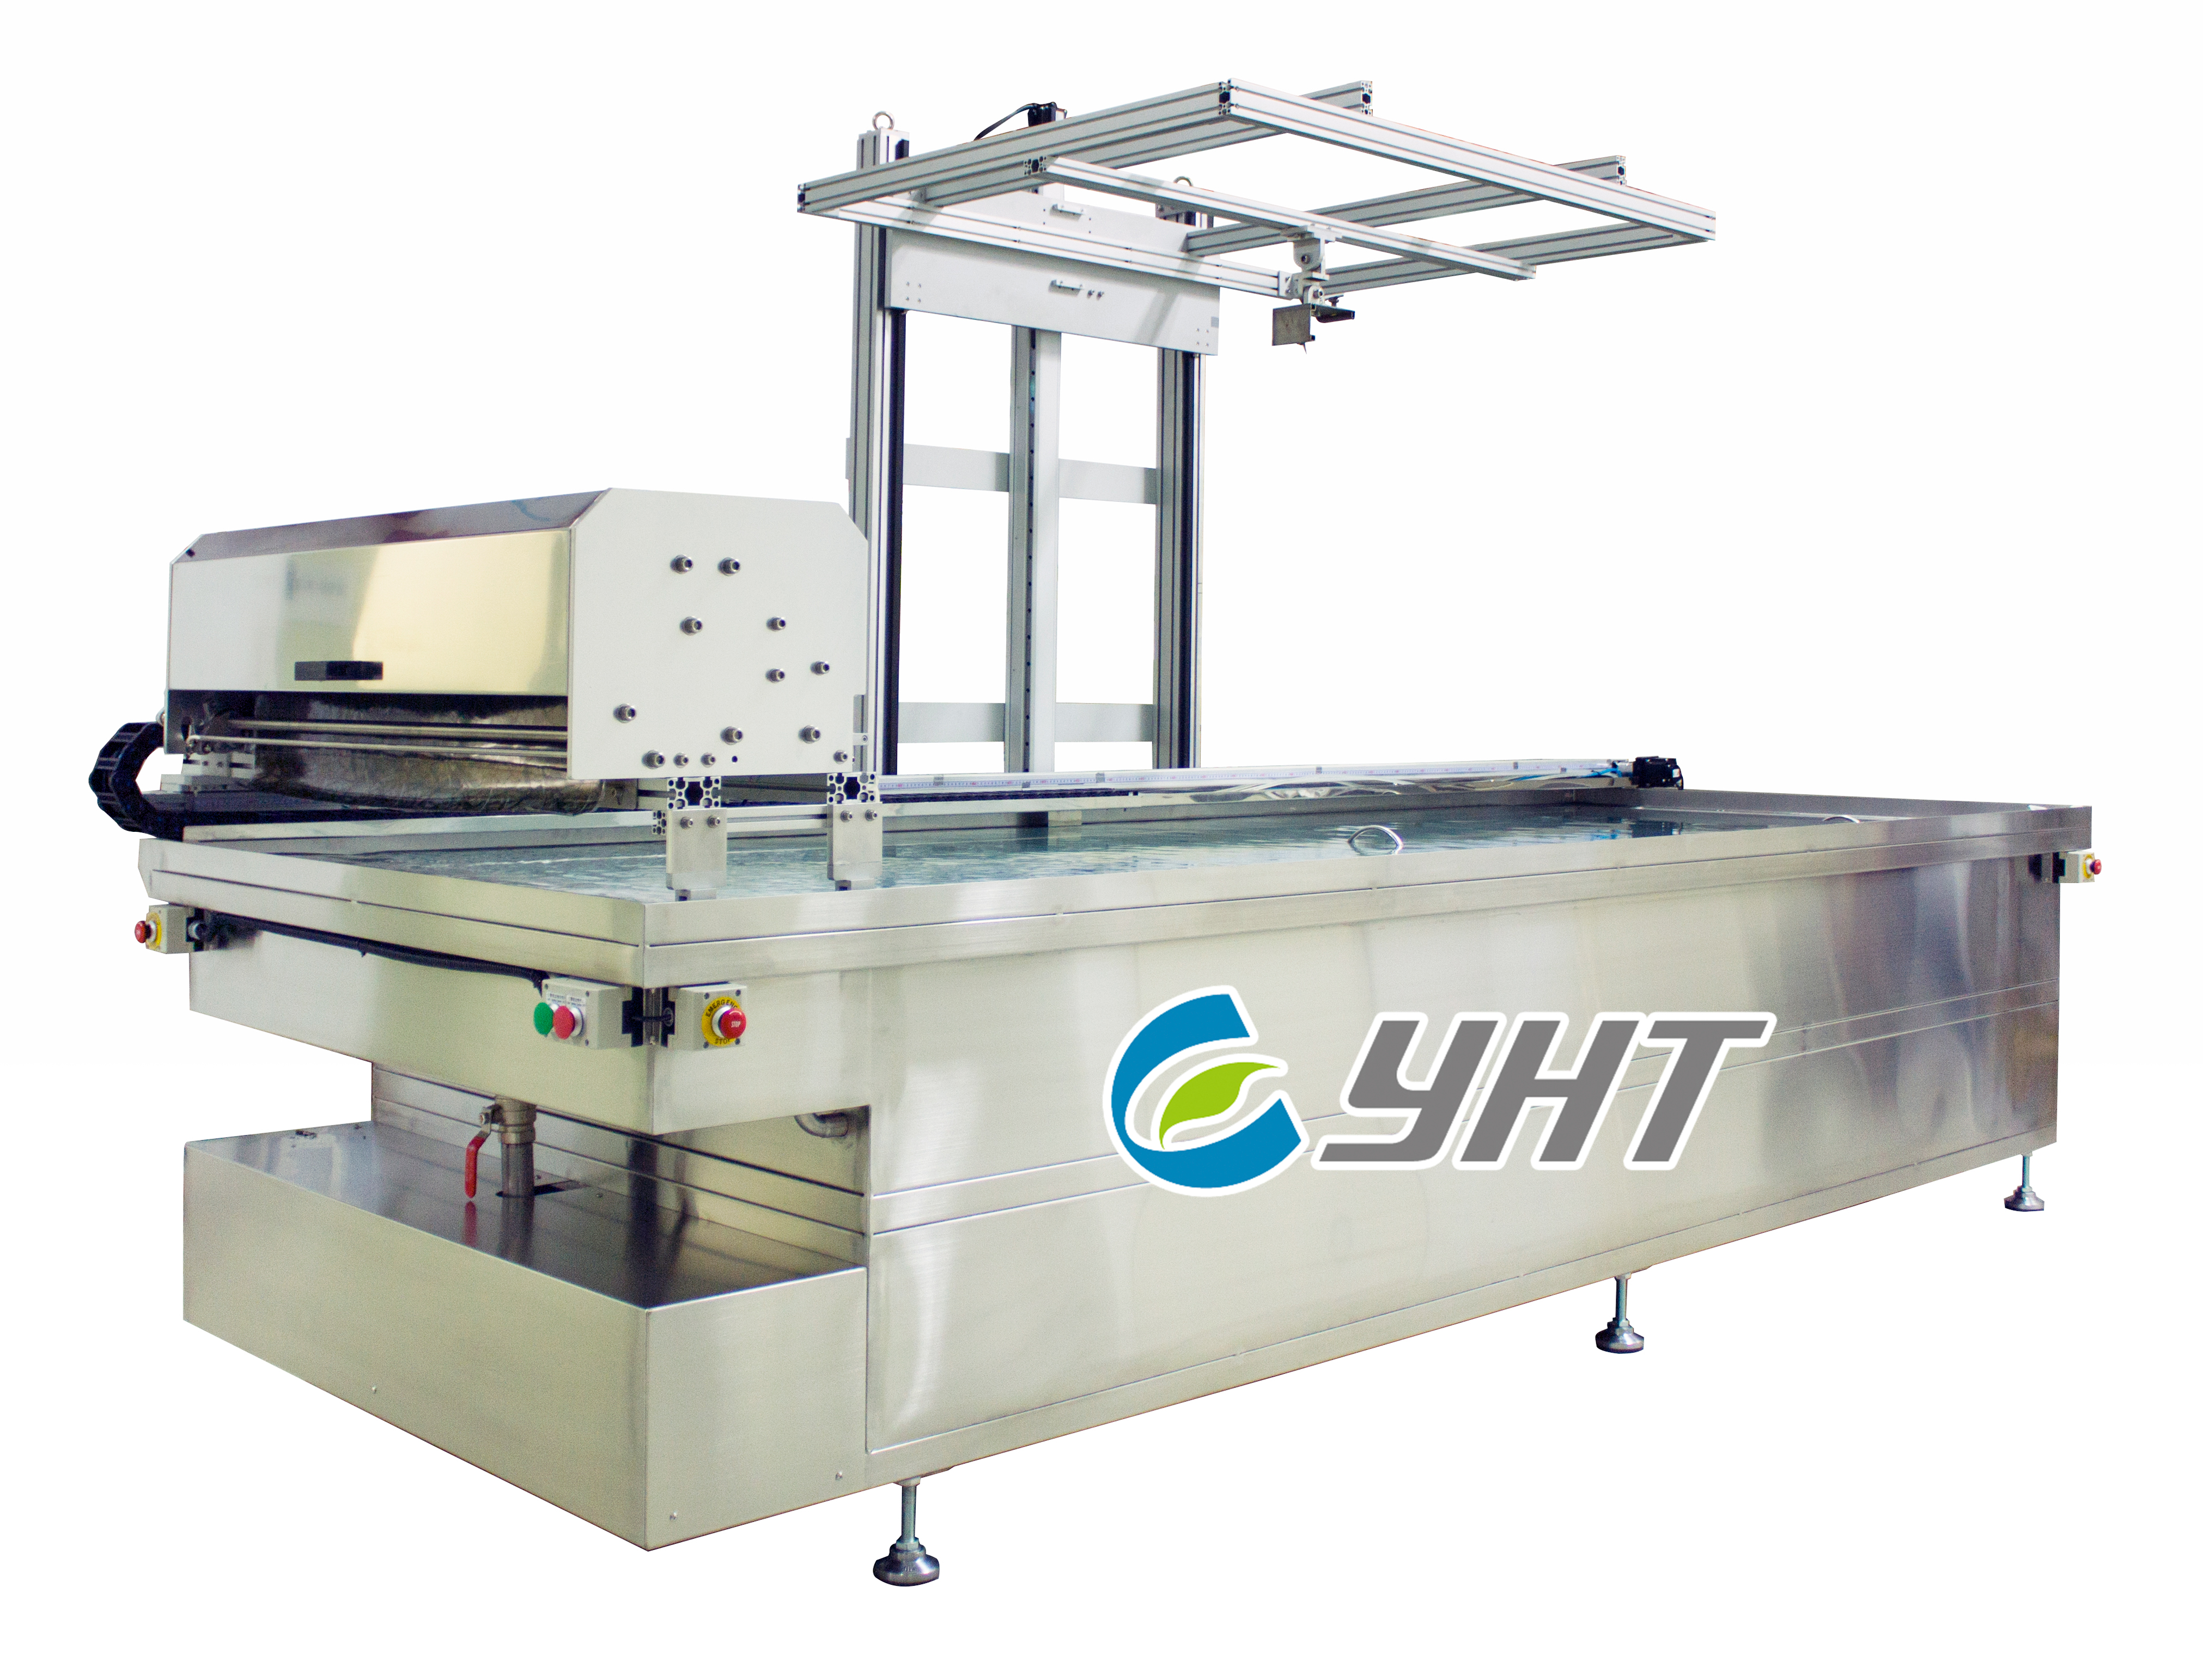 3M Semi-Auto Dipping Machine Equipped with Auto Film Layer + Auto Spray System & Production Arm